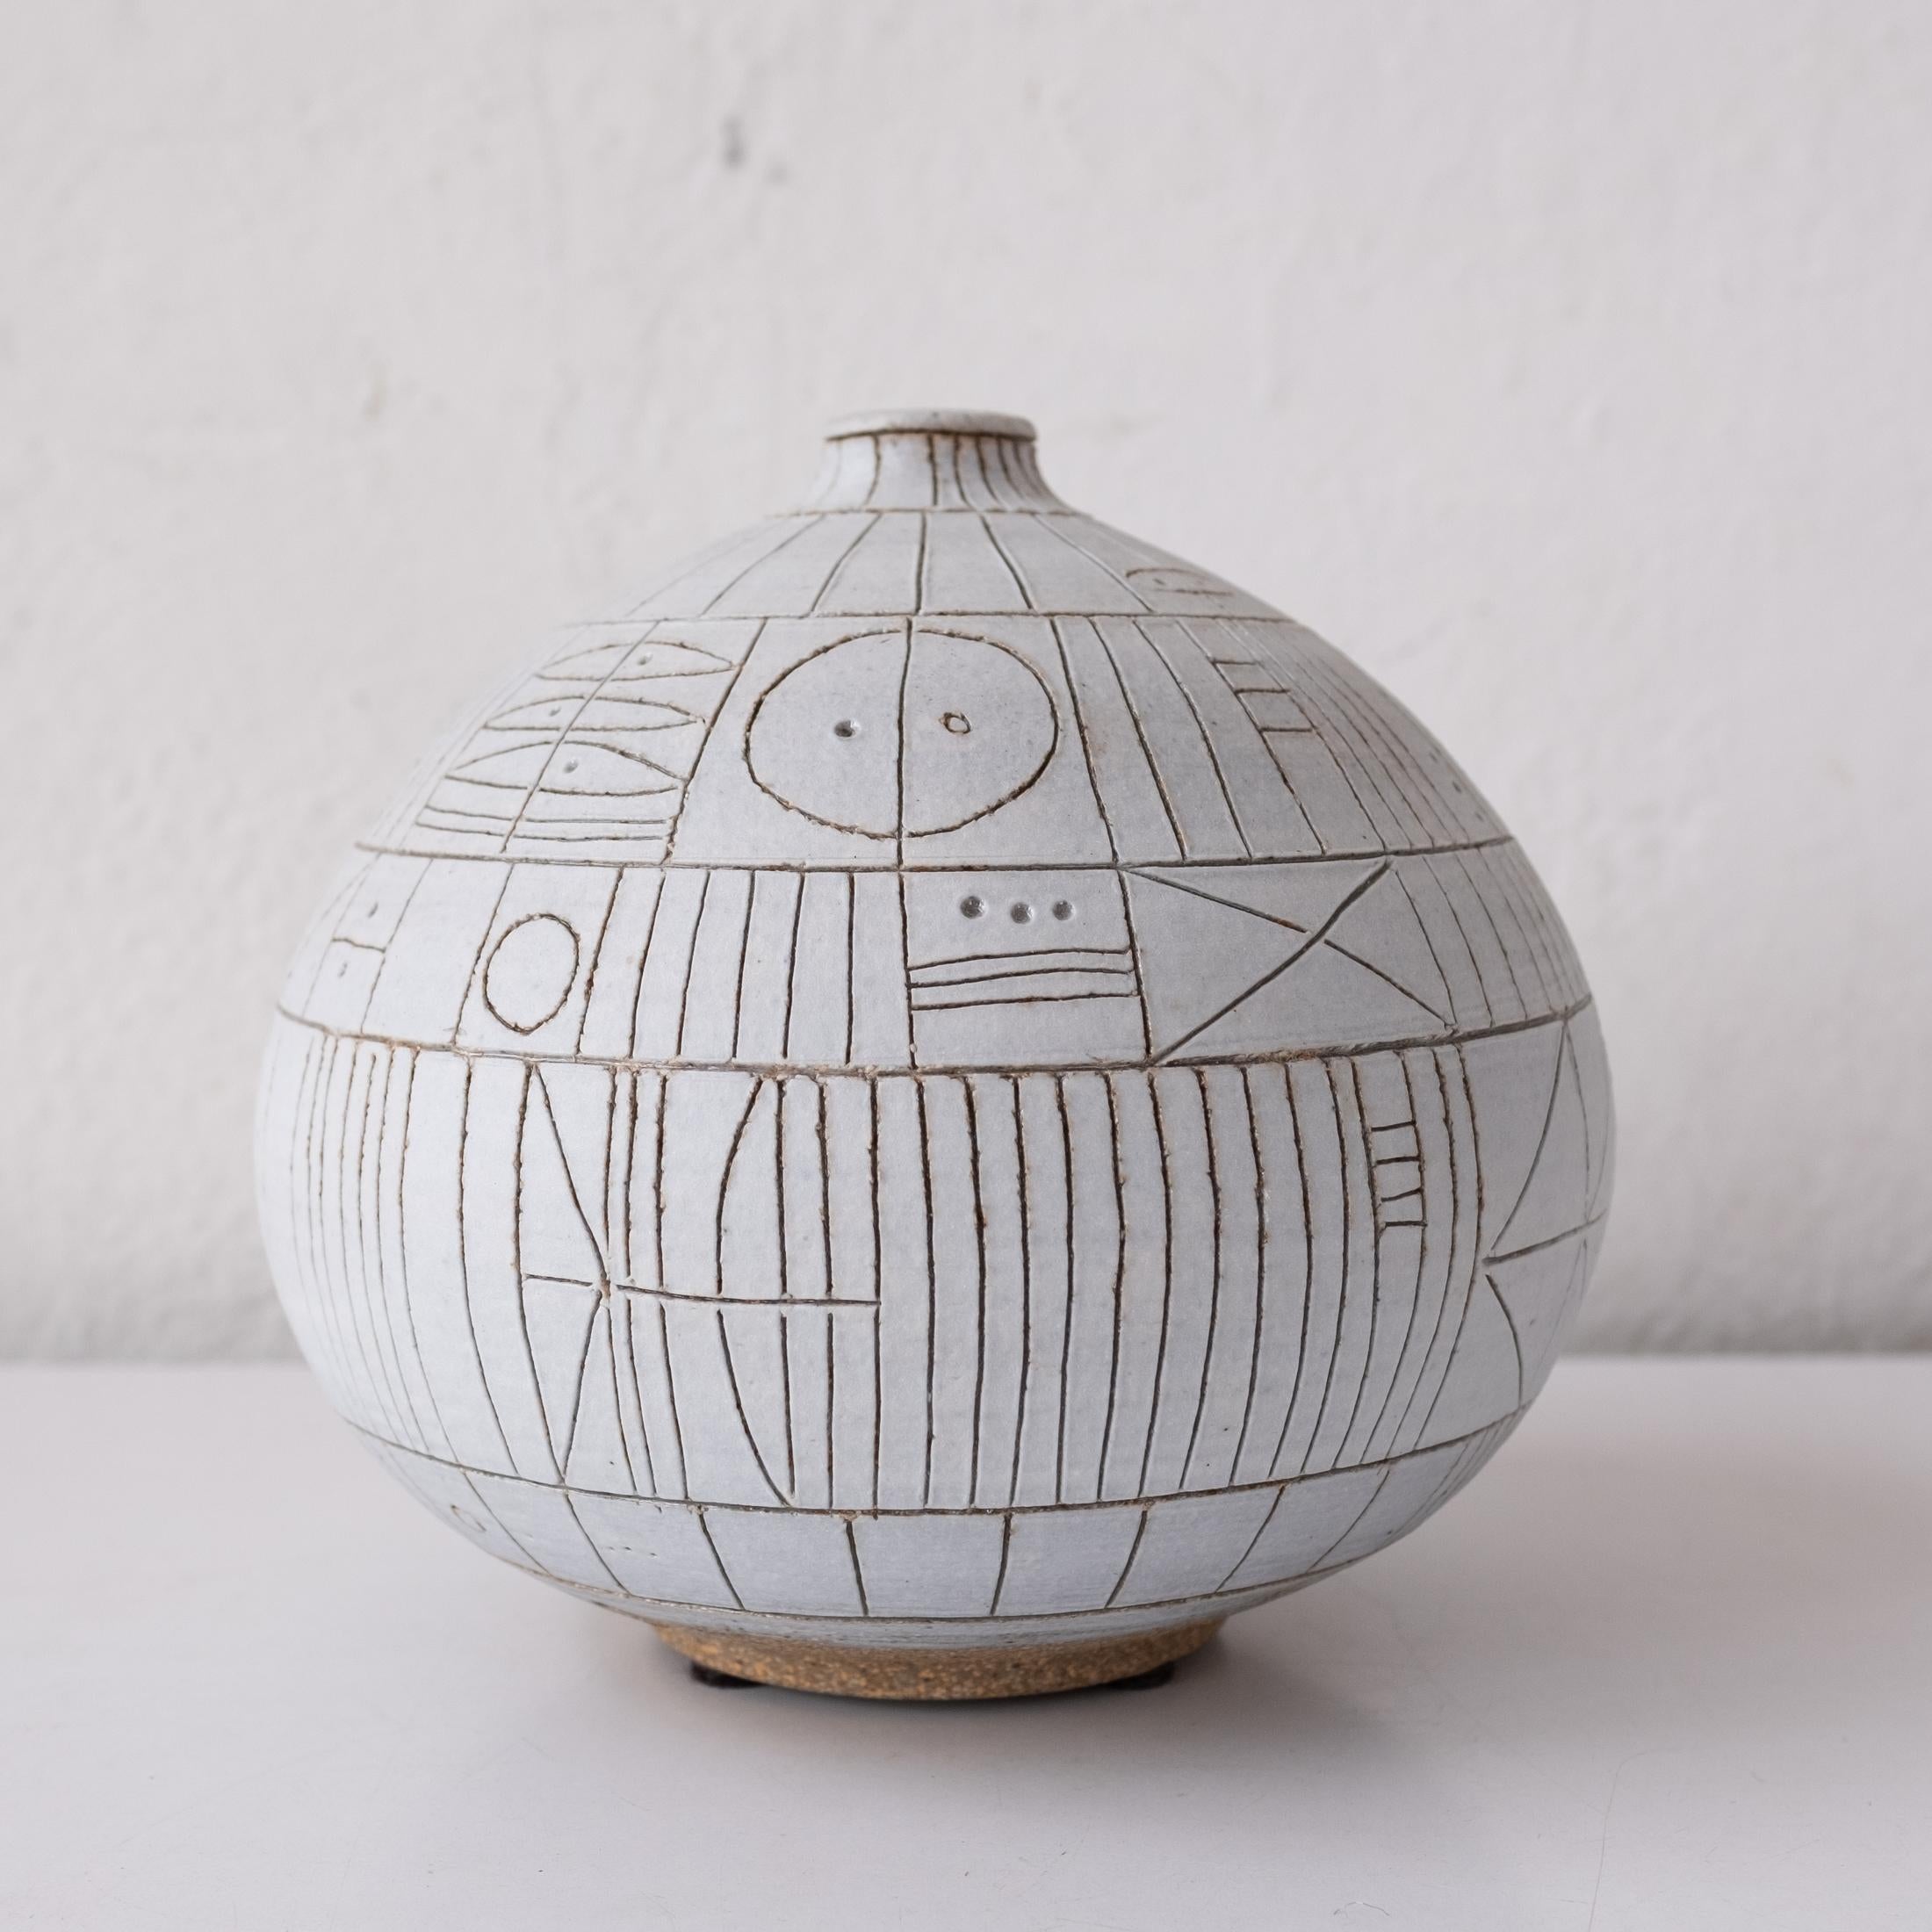 Vase by Heather Rosenman. Beautiful incised design on a perfectly thrown form. 

Bio: 
A New York native, currently based in Los Angeles, she studied at The Cooper Union and The Basel School of Design in Switzerland. Her collections are informed